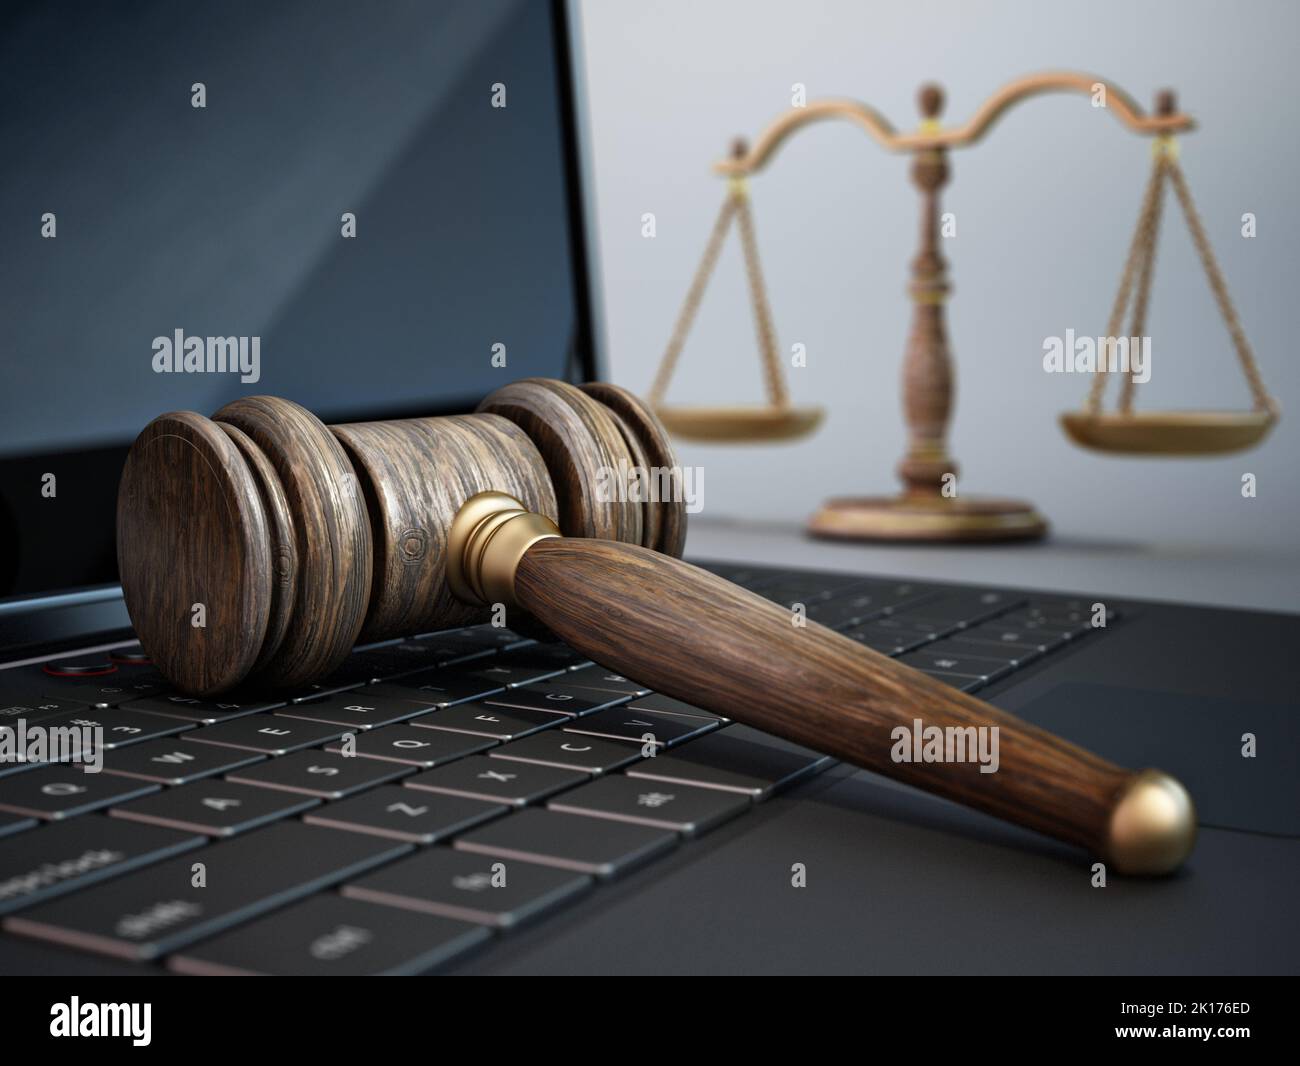 Judge gavel and balanced scale standing on laptop computer keyboard. 3D illustration. Stock Photo